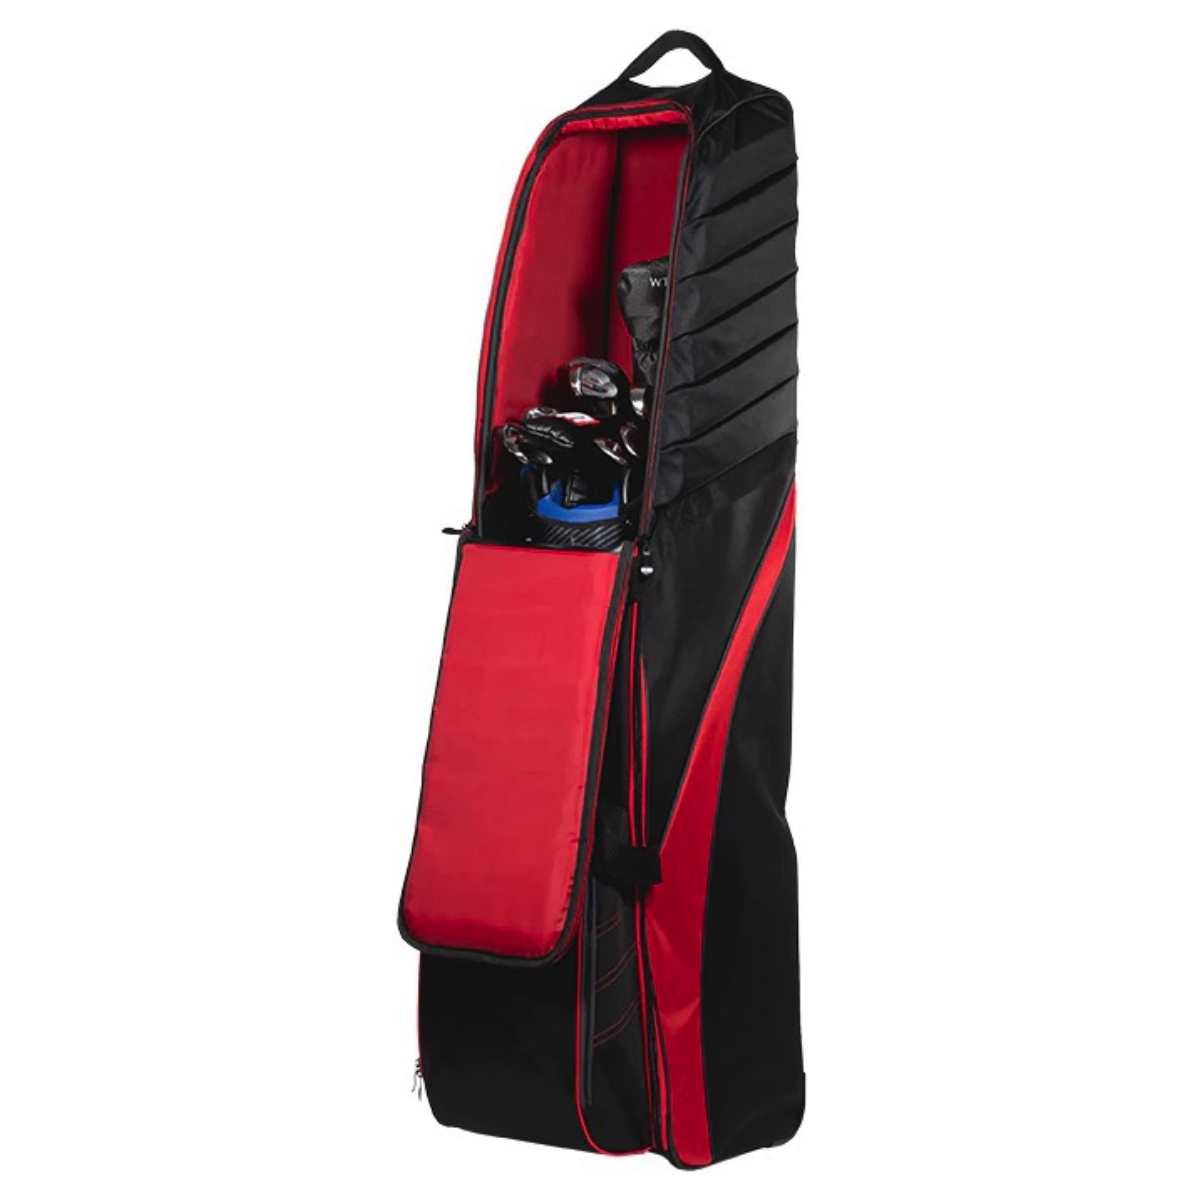 Bag Boy T750 Black/Red Travelcover